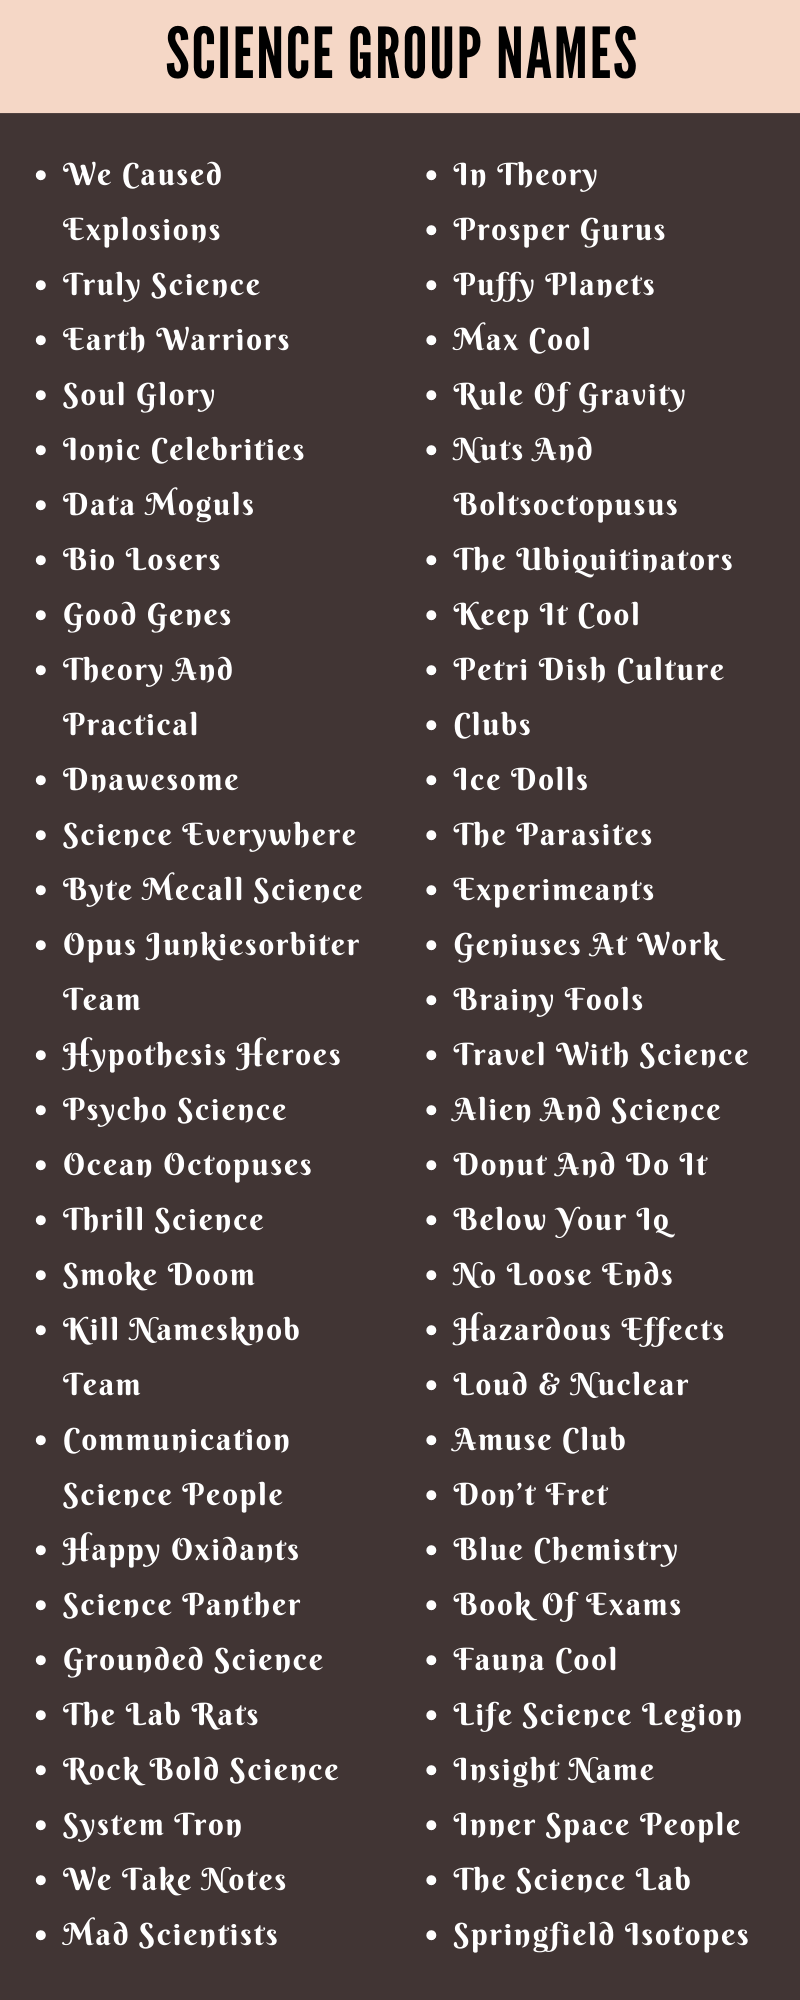 Science Group Names